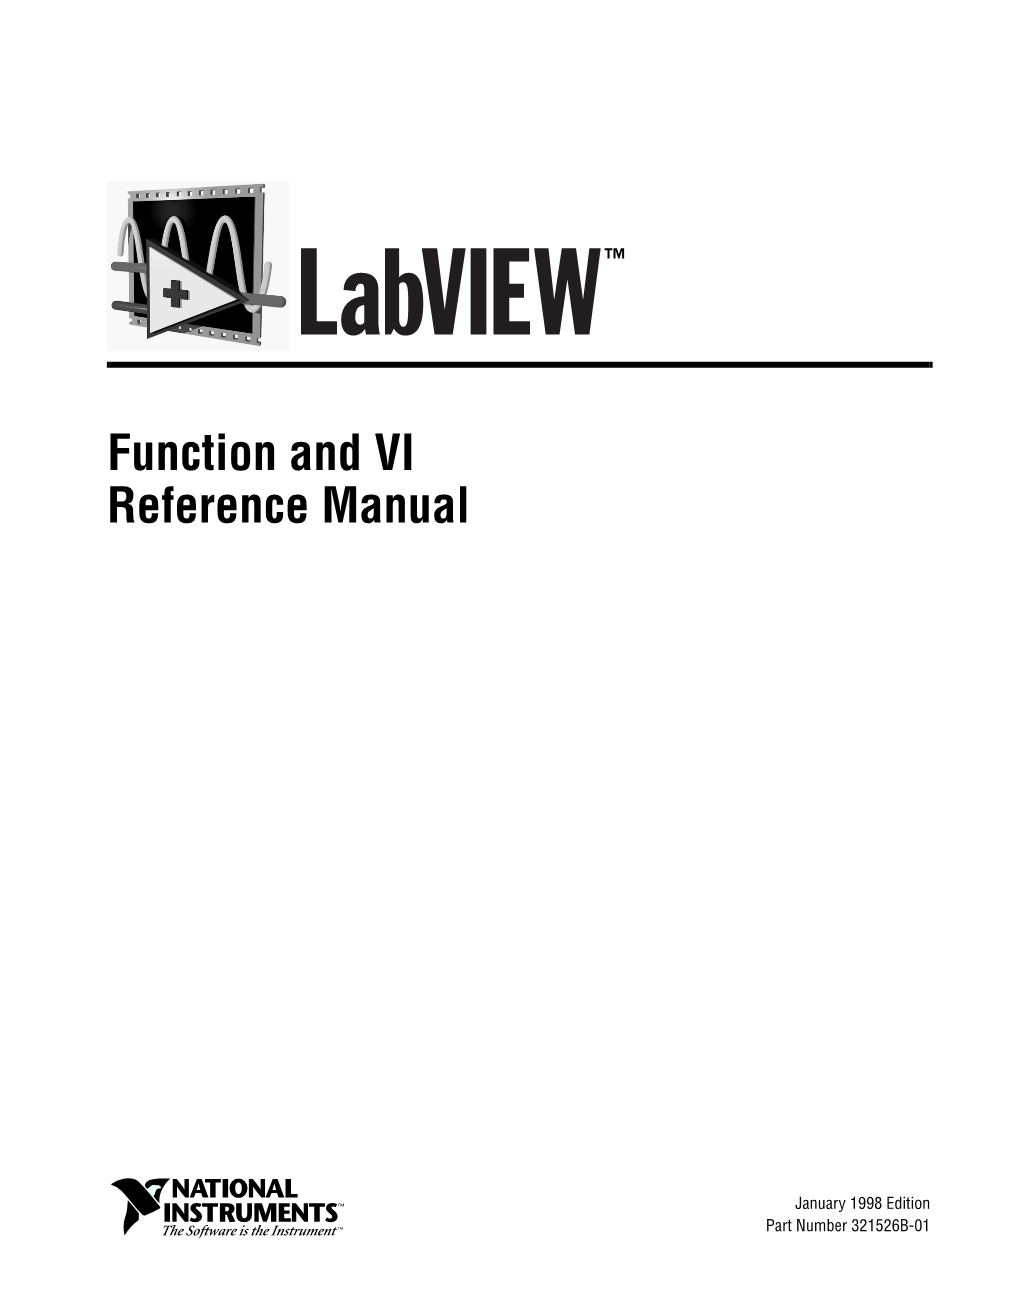 Labview Function and VI Reference Manual